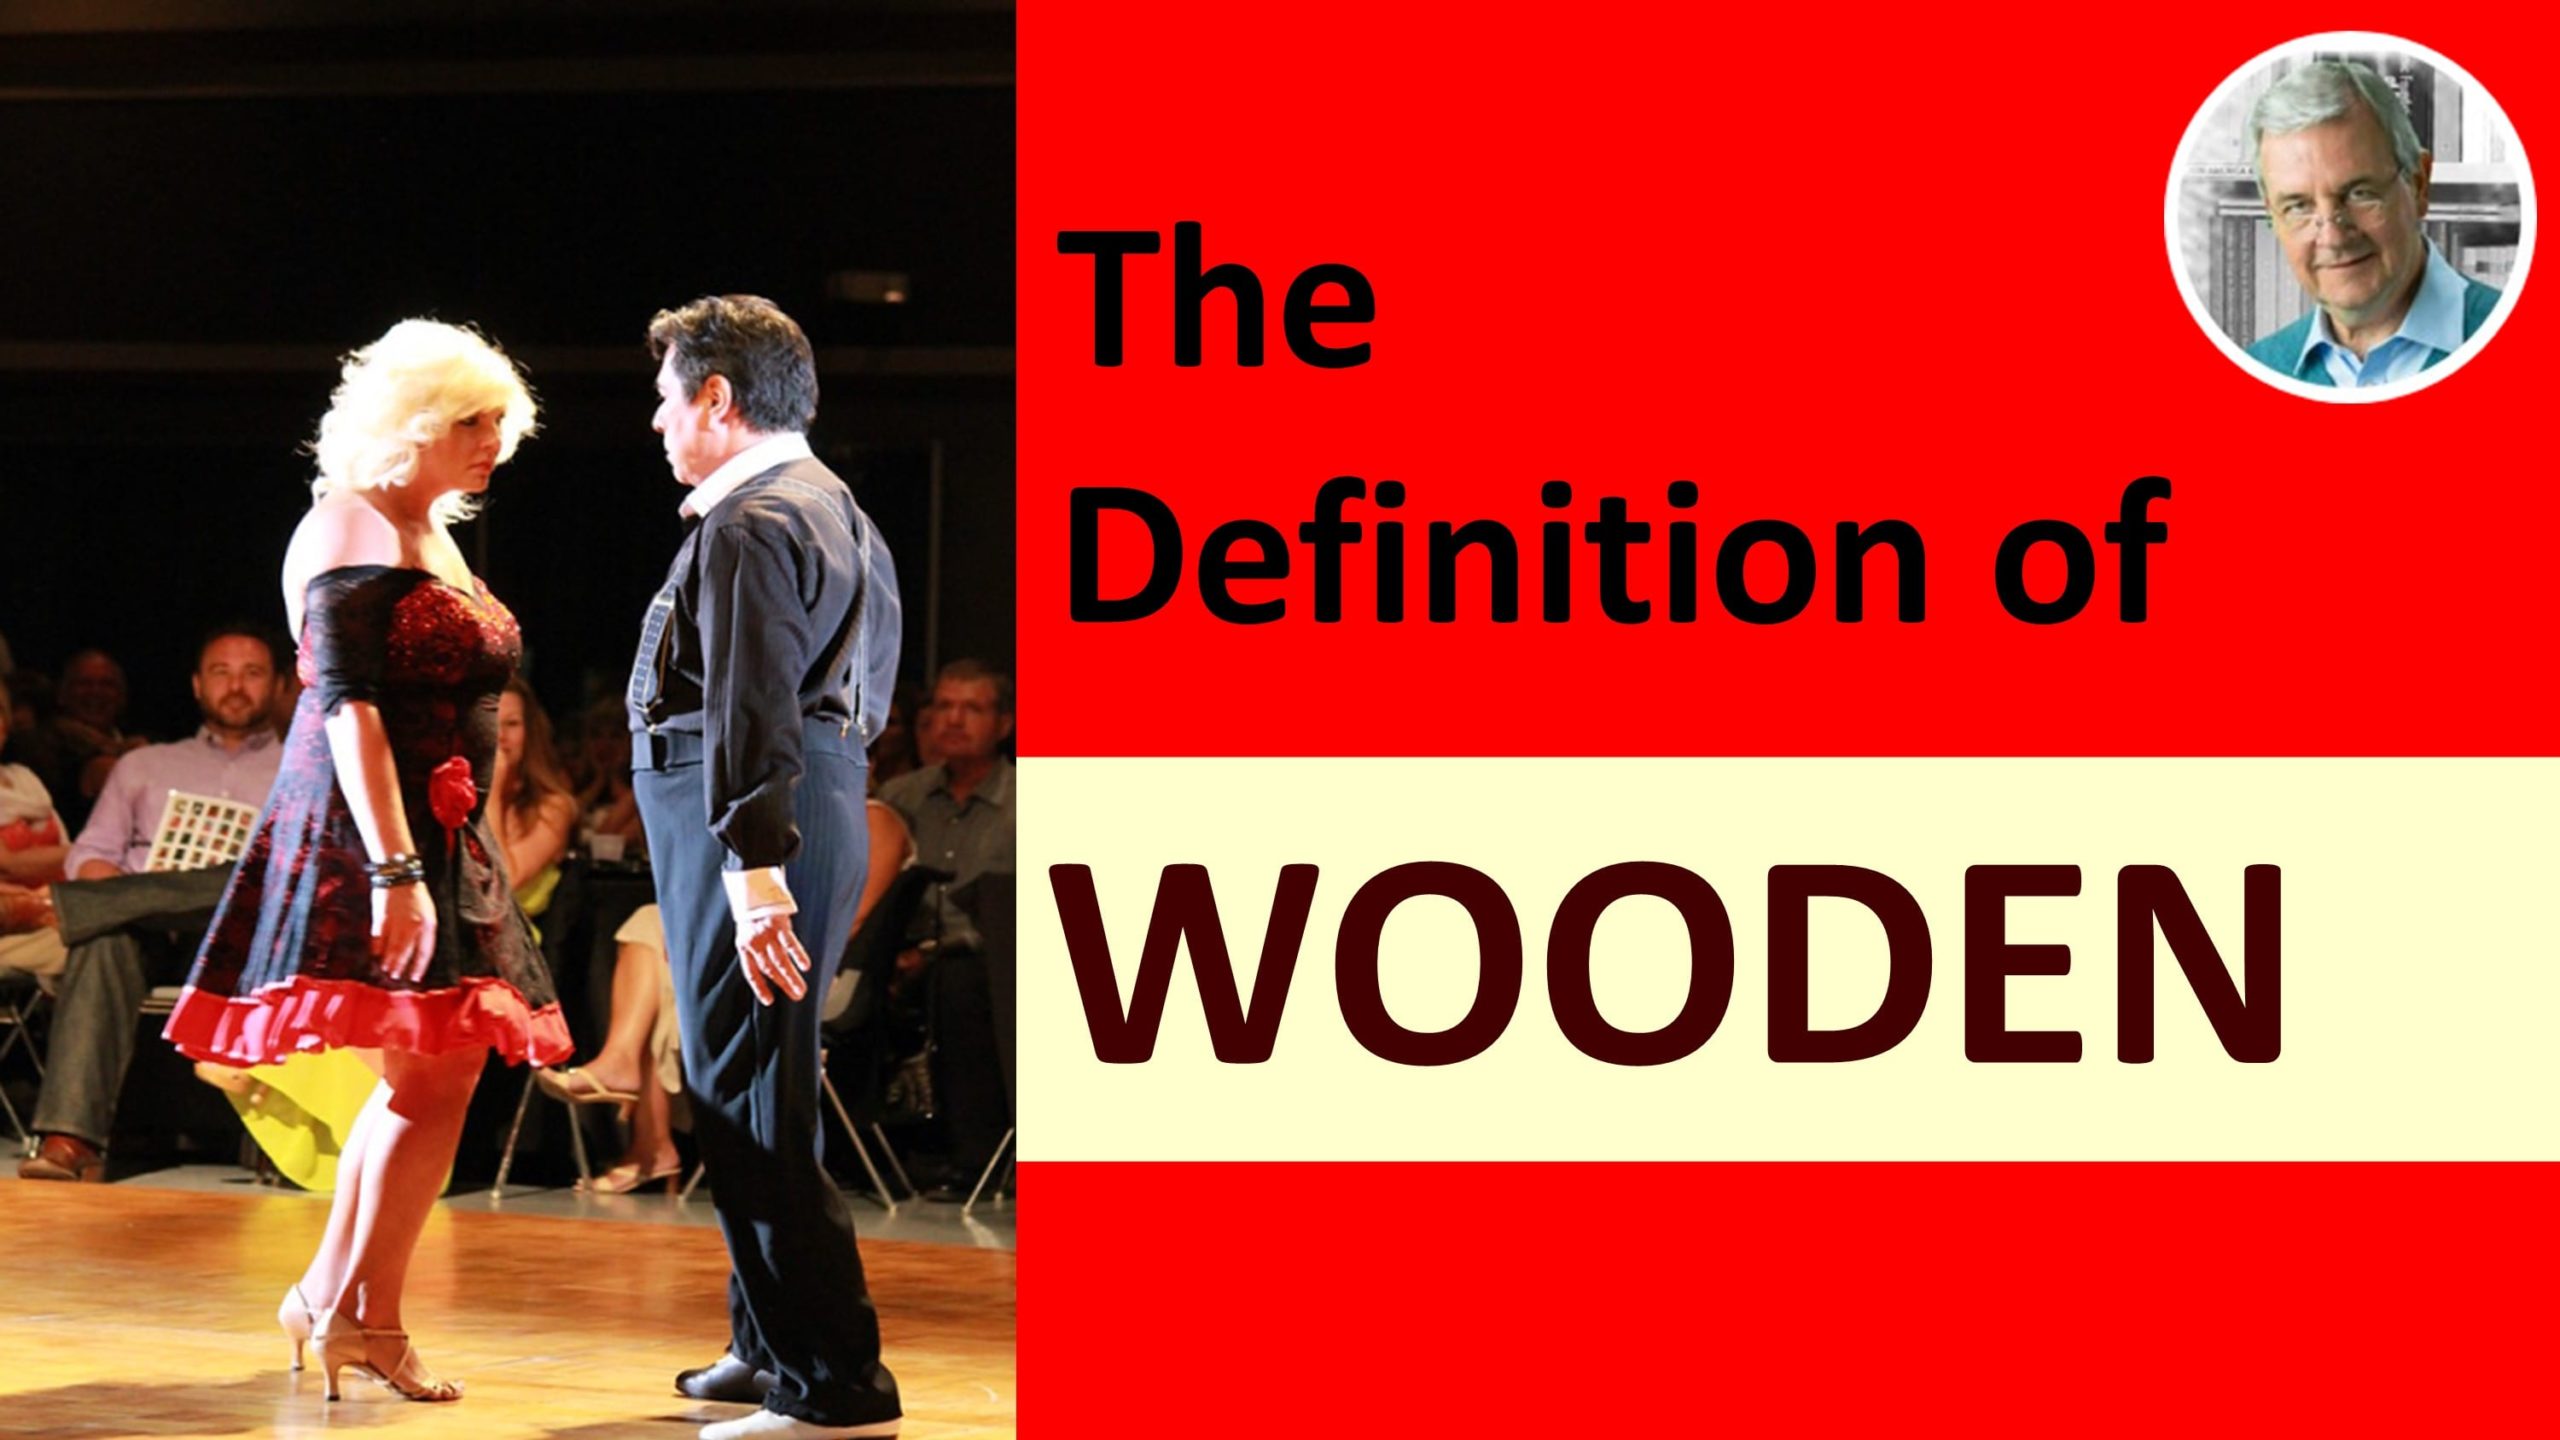 meaning of wooden - wooden in a sentence